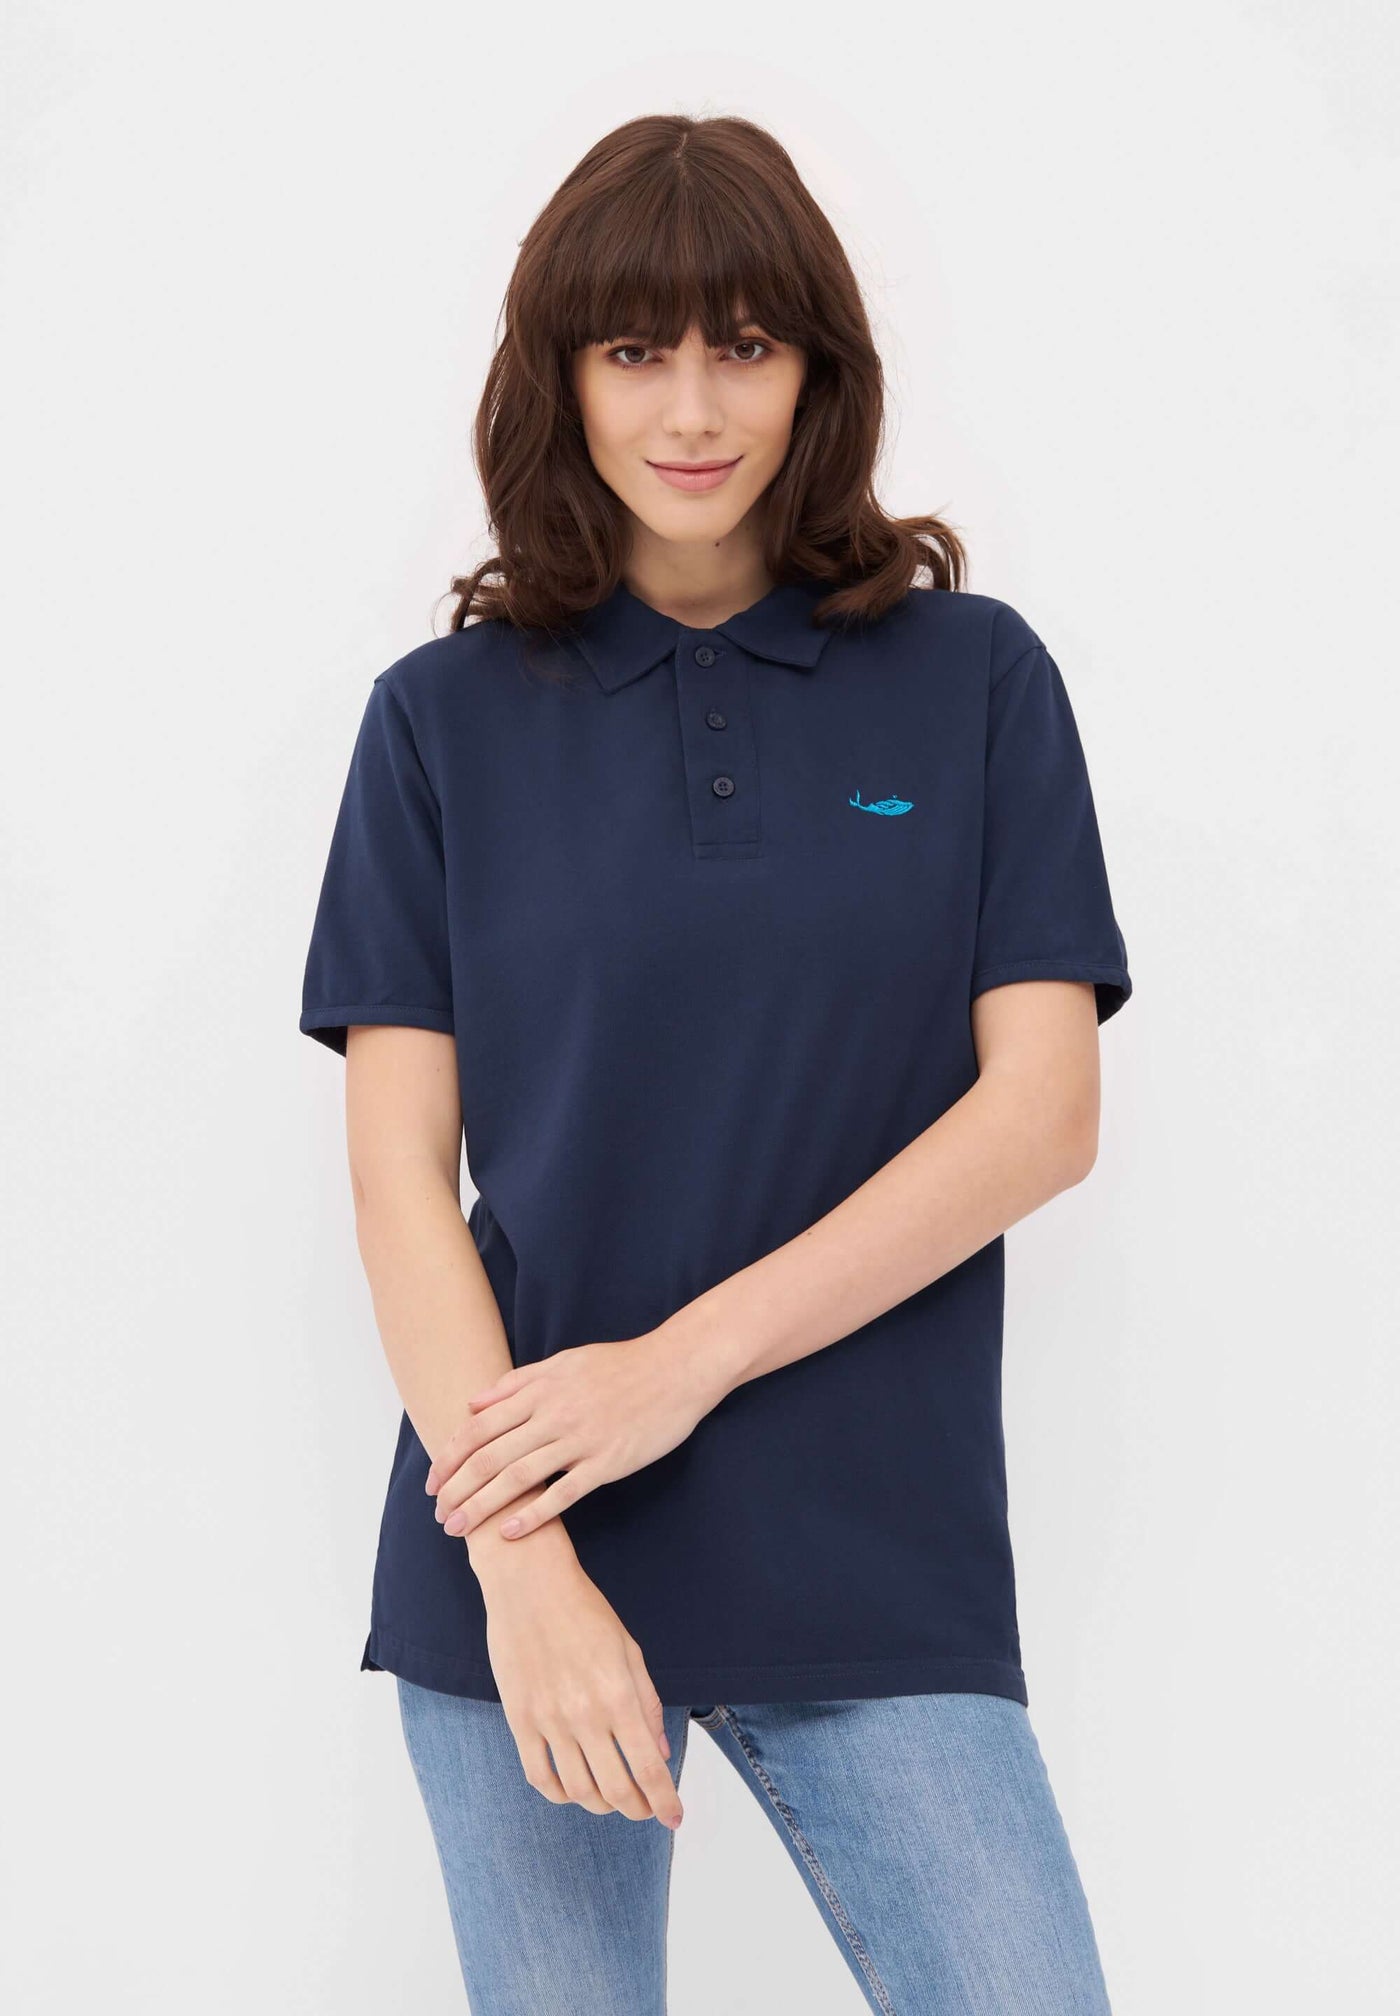 MBRC UNISEX SUSTAINABLE BLUE OCEAN POLO "LIGHT BLUE LOGO" - FRONTAL VIEW WOMAN